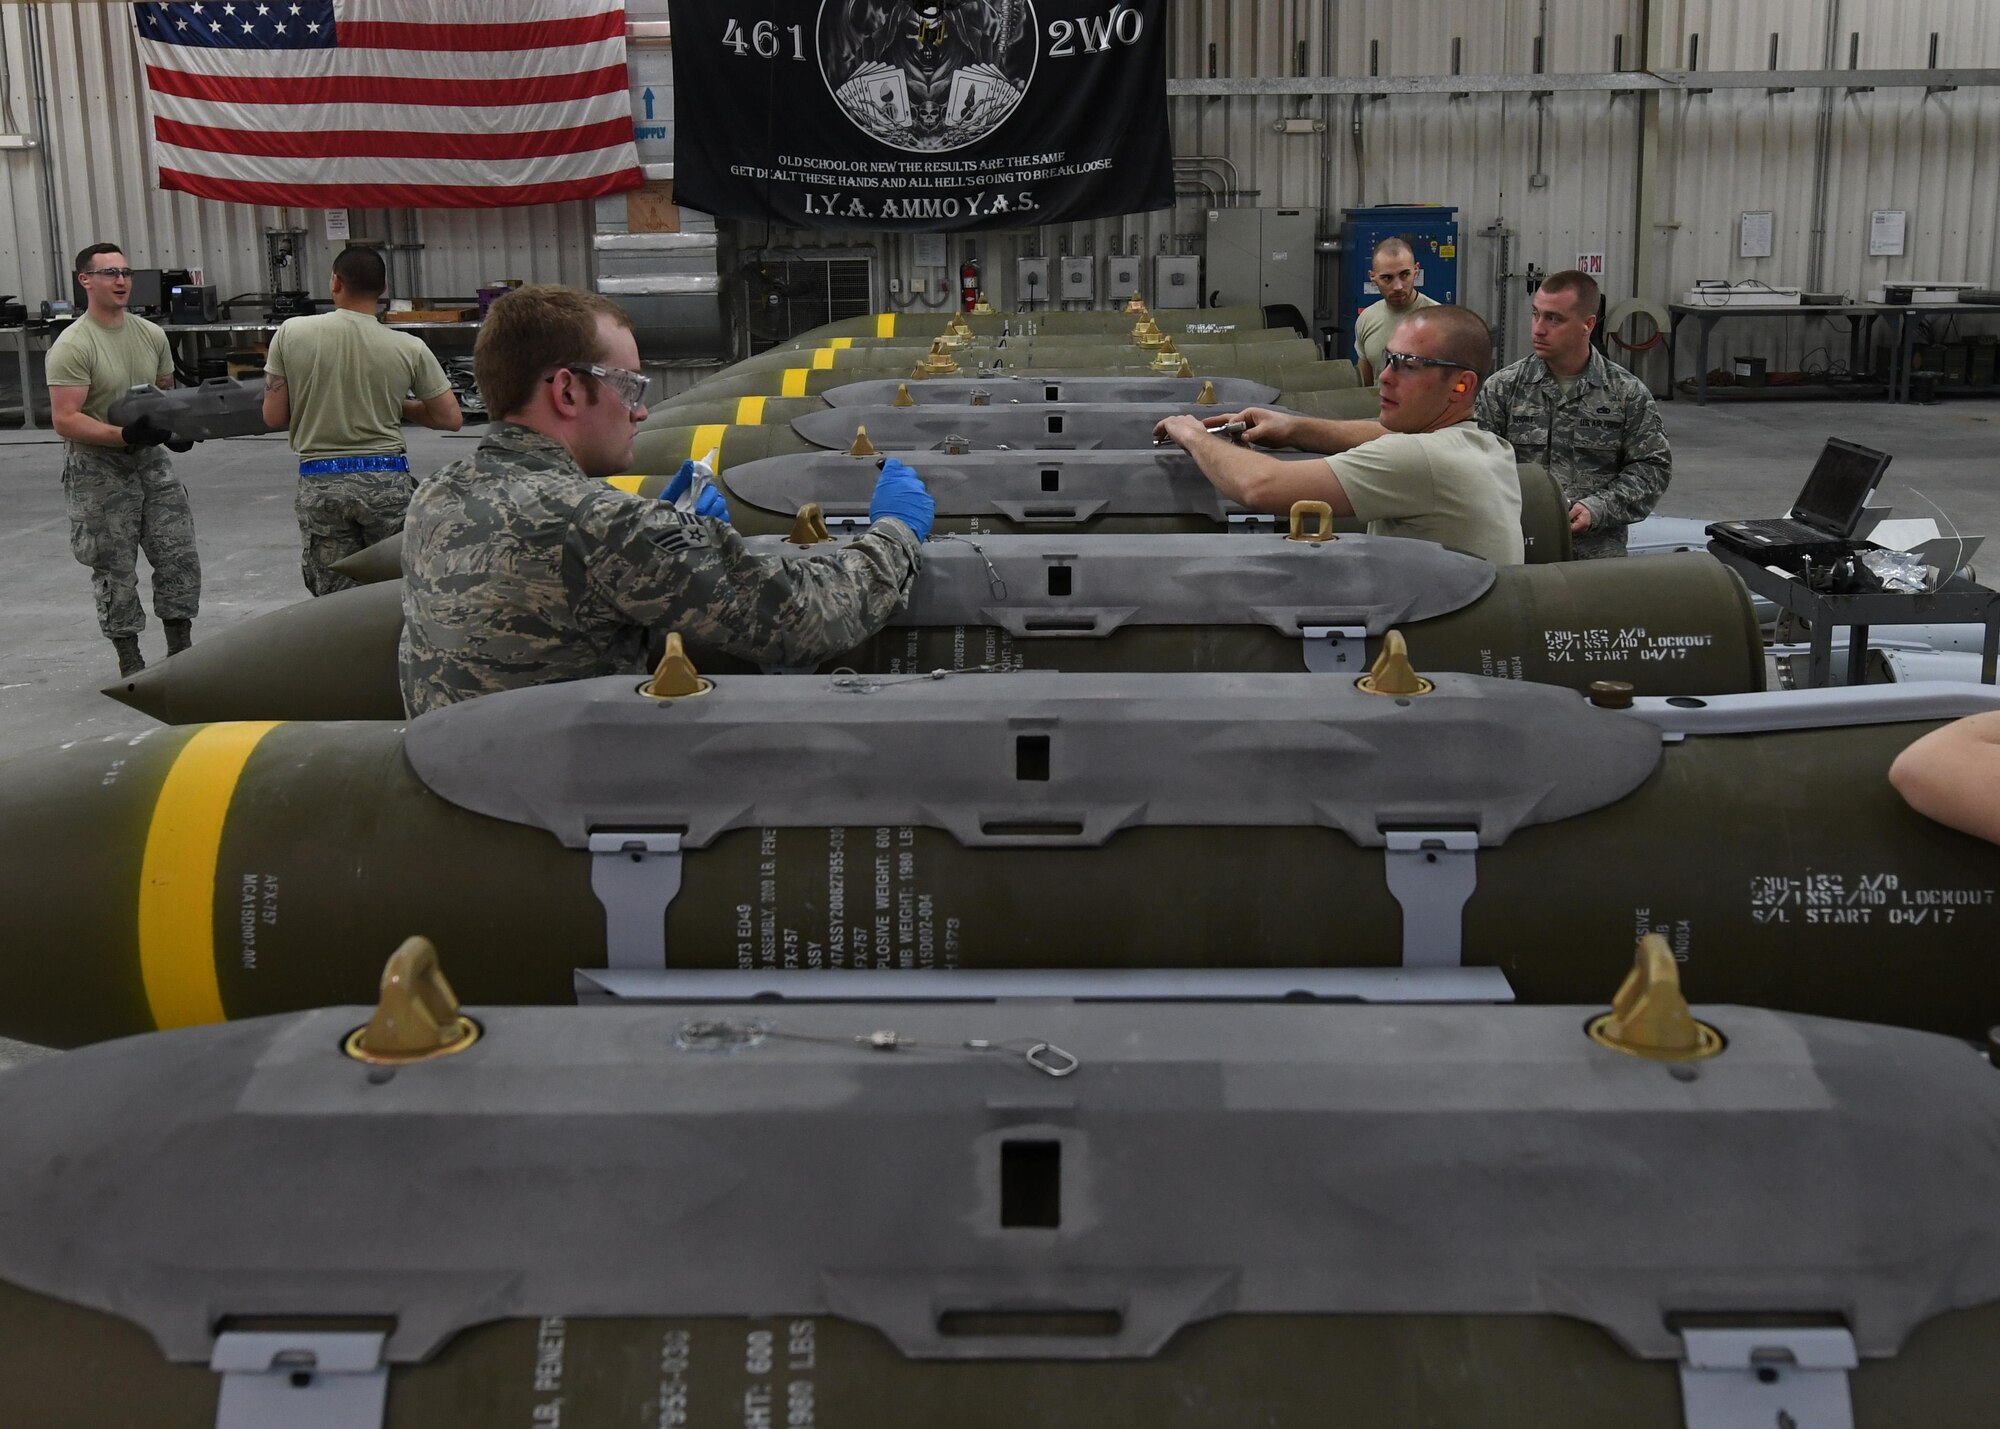 Ammo Airmen with the 379th Expeditionary Maintenance Squadron assemble guided bomb unit-31’s at Al Udeid Air Base, Qatar, April 6, 2017. The ammo Airmen at Al Udeid work around the clock to provide bombs and munitions used to support combat operations across the U.S. Central Command area of responsibility. (U.S. Air Force photo by Staff Sergeant Miles Wilson)